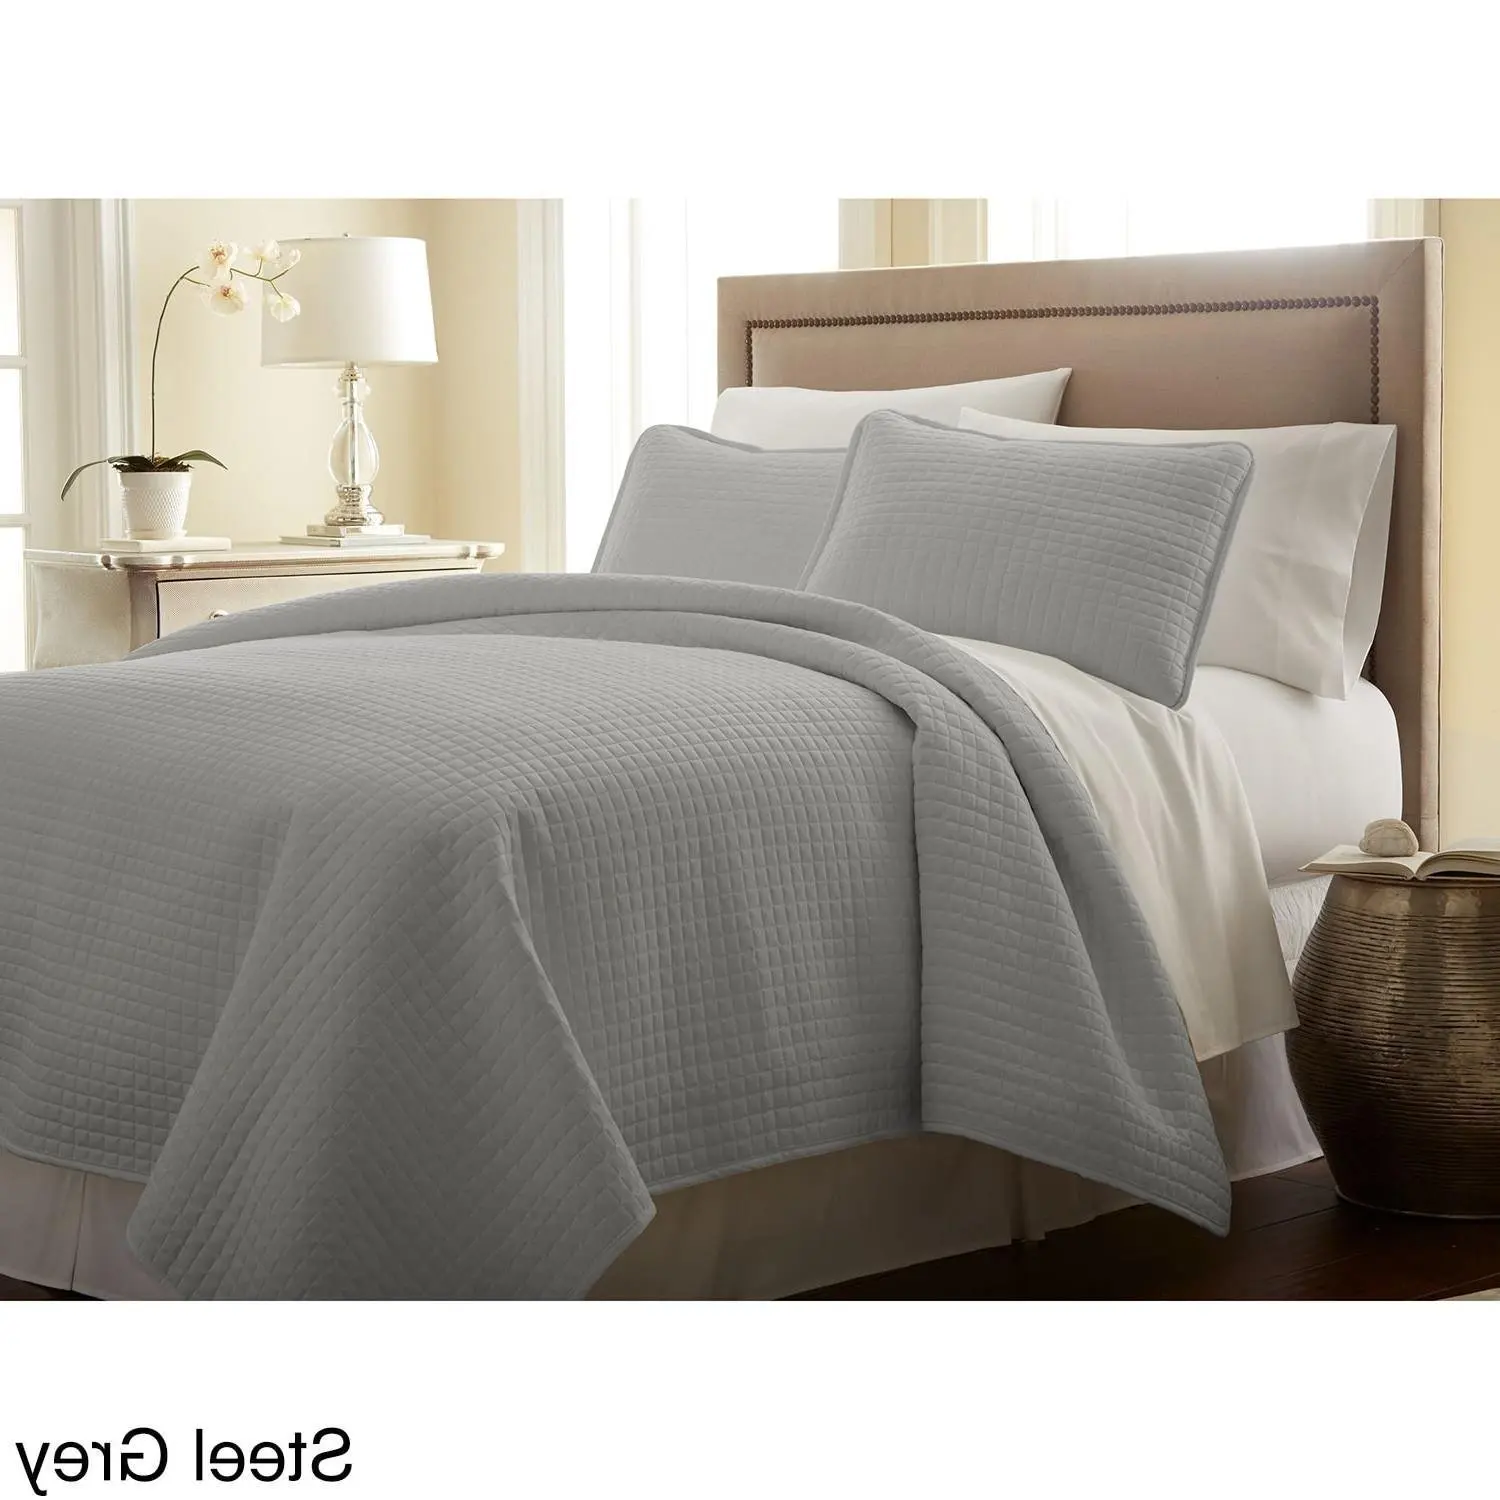 Buy Single Piece Twin Grey Woven Waffle Weave Blanket, Solid Color ...